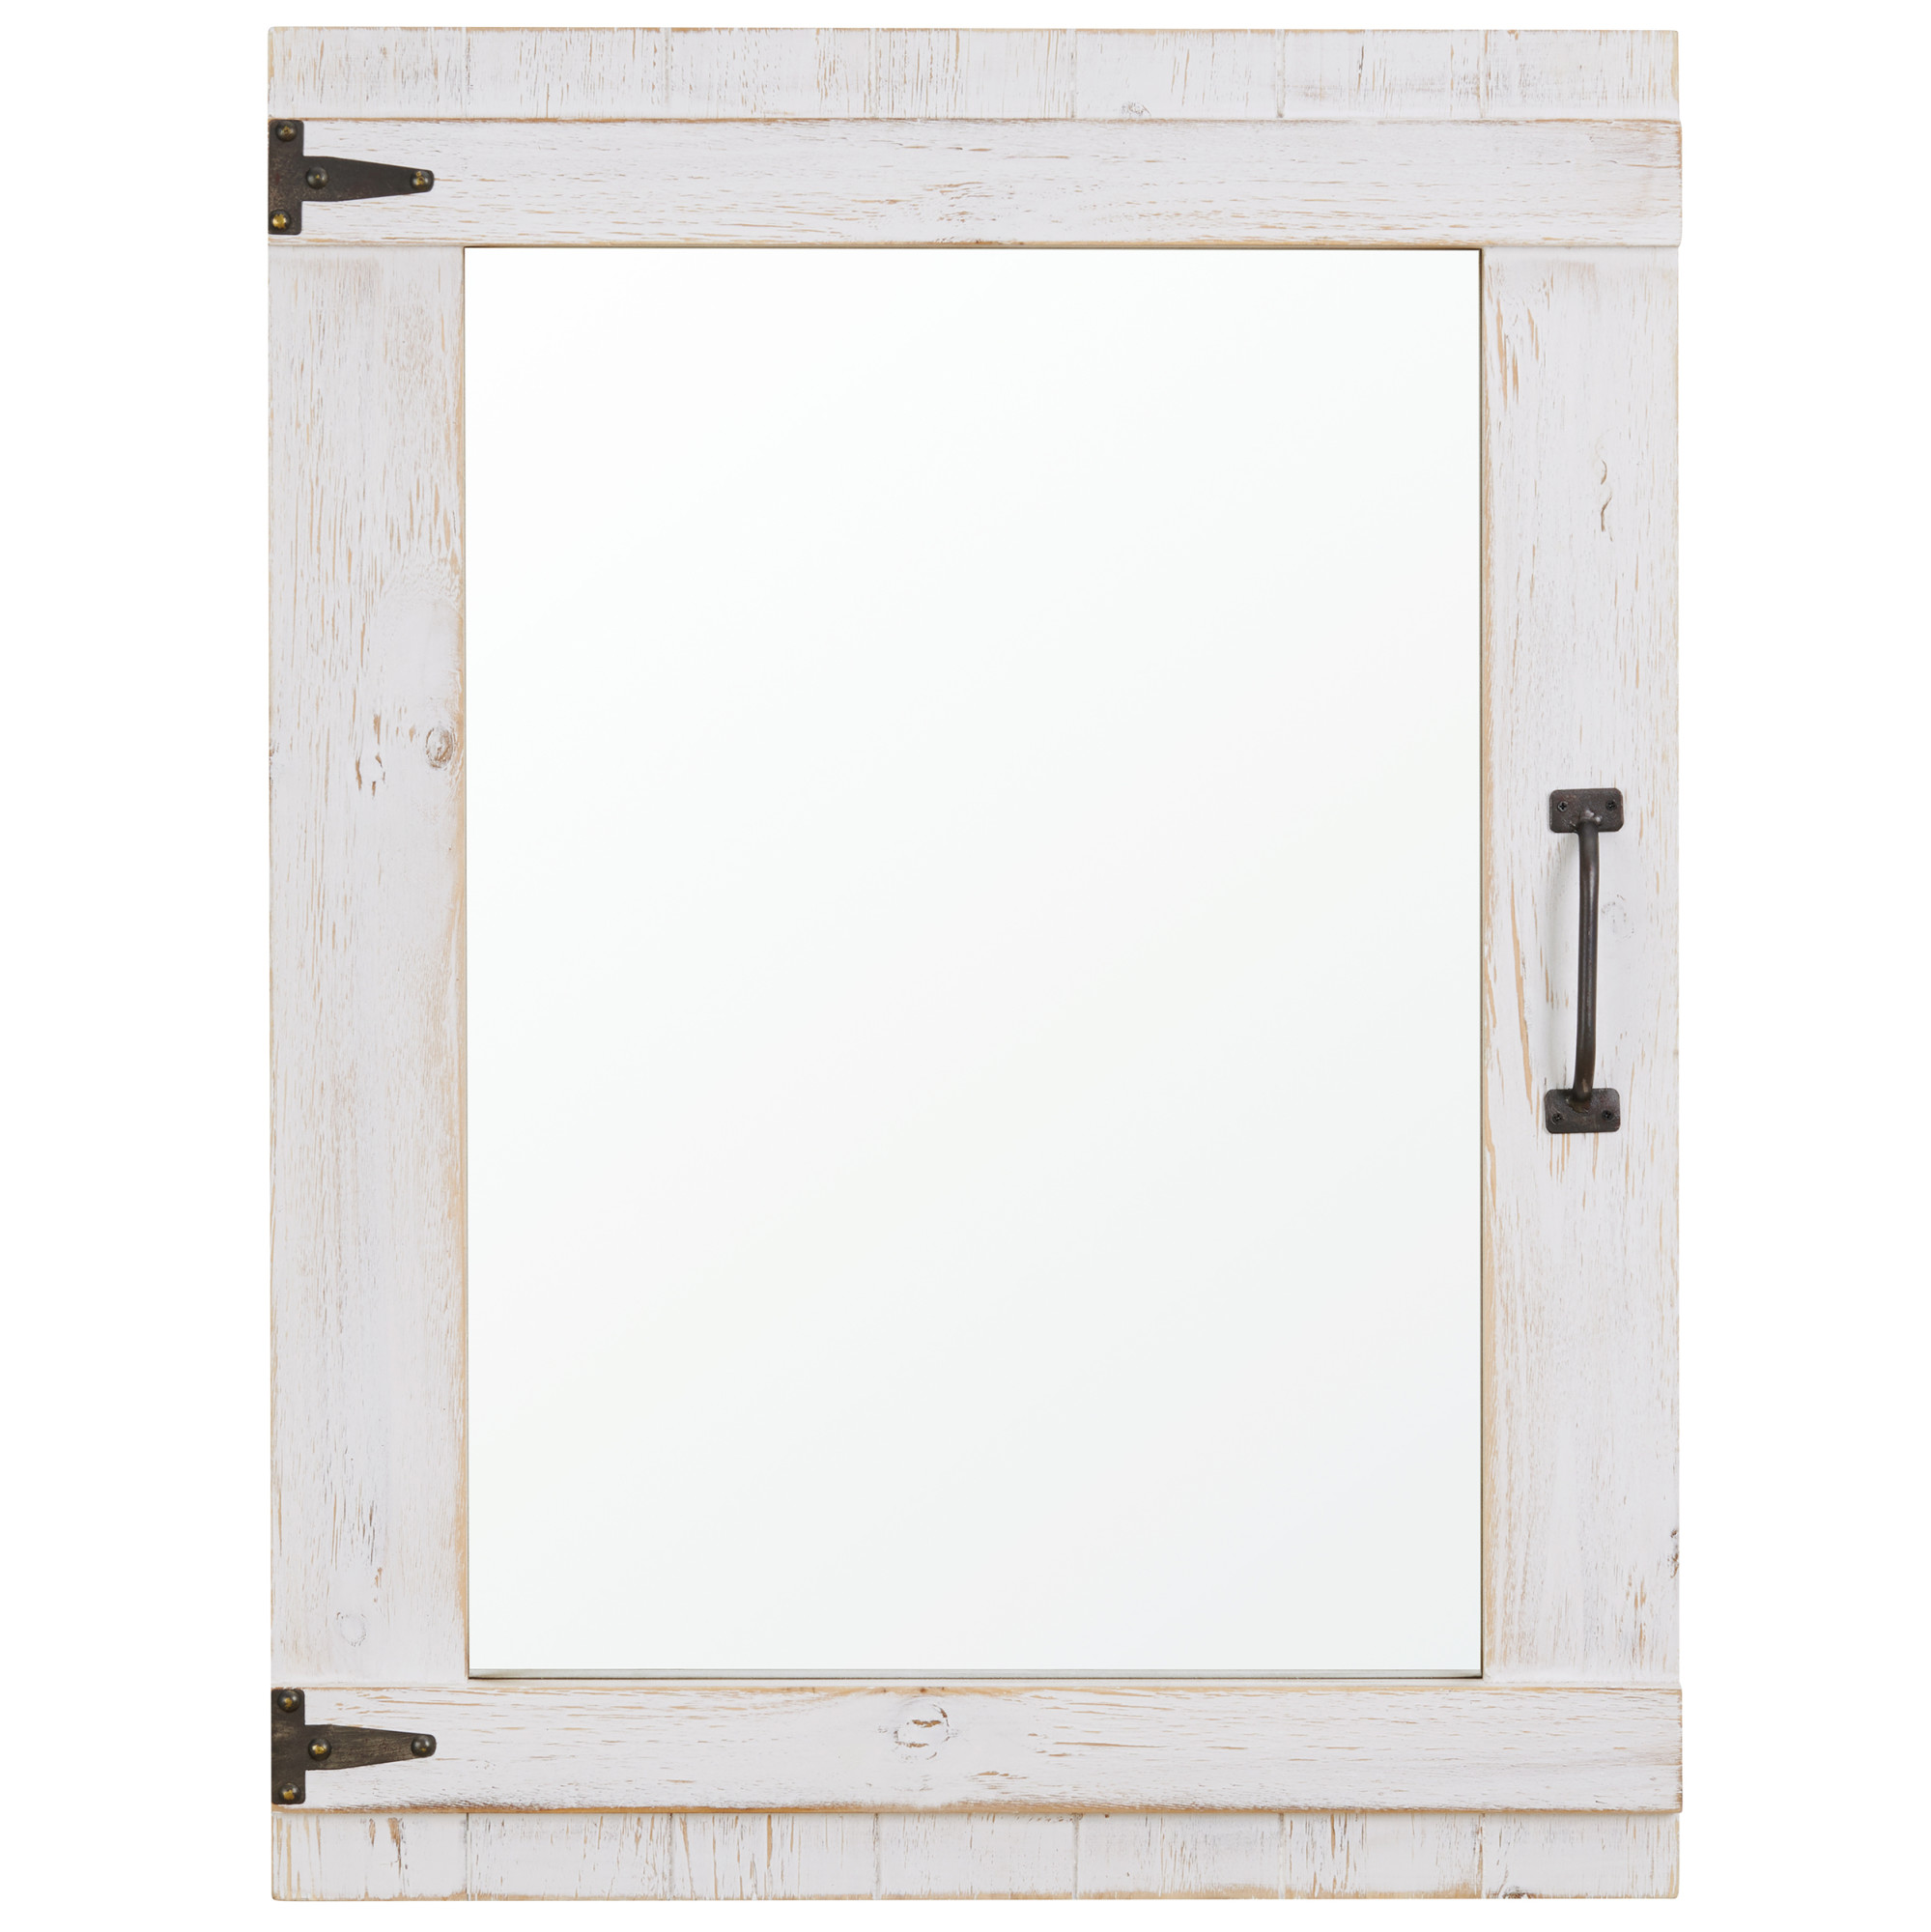 FirsTime  Co. Weathered Barn Accent Wall Mirror, 32" x 24", Rustic Gray - 2